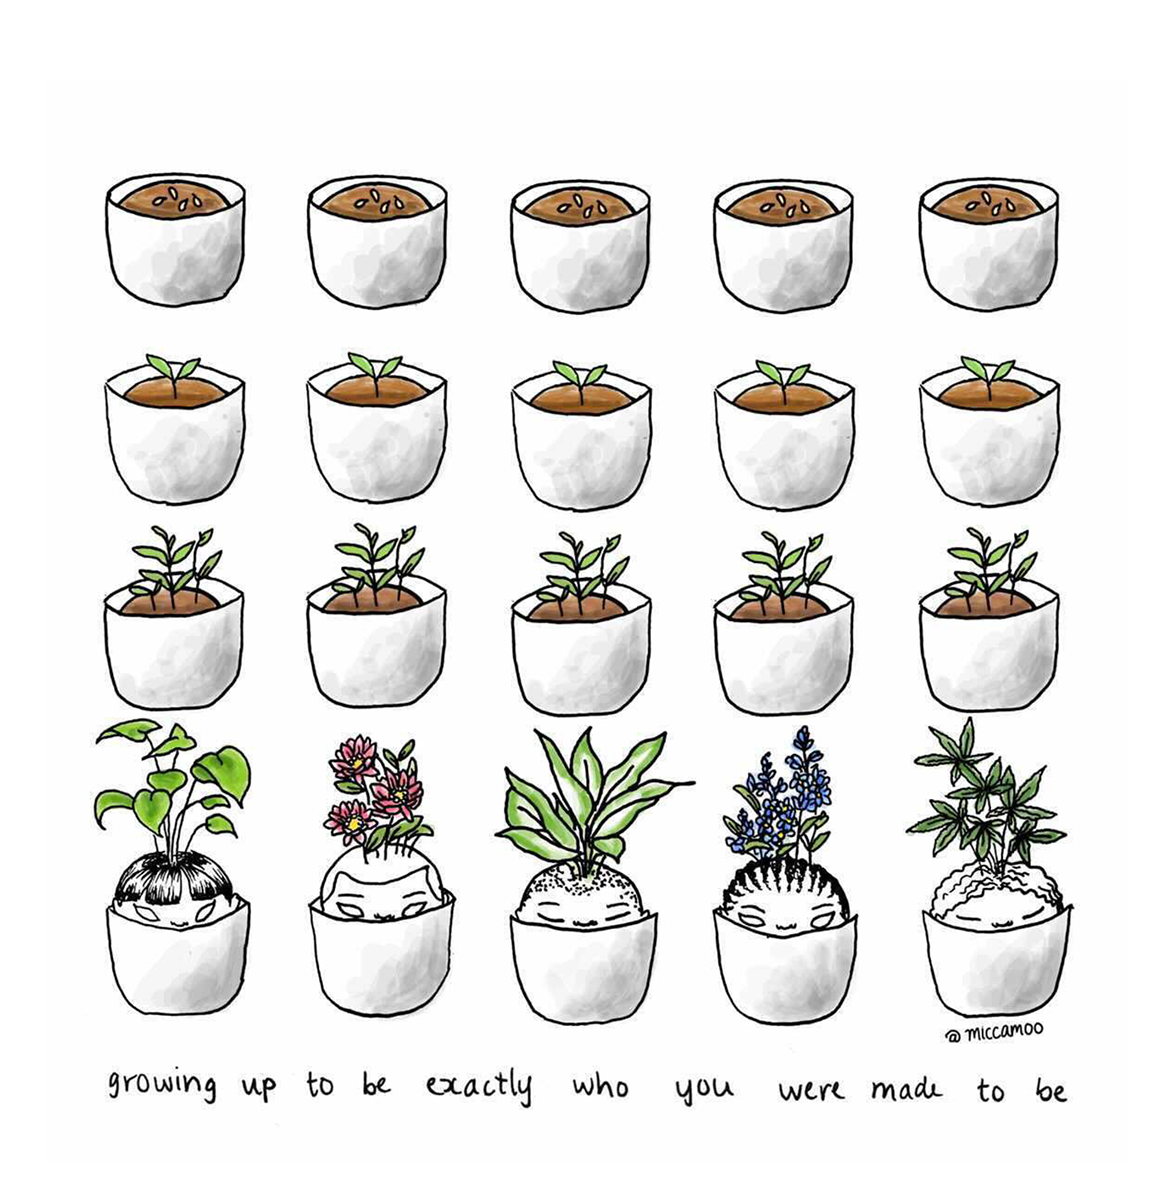 Drawing of 20 pot plants showing growth from seeds. With caption 'growing up to be exactly who you were made to be'.